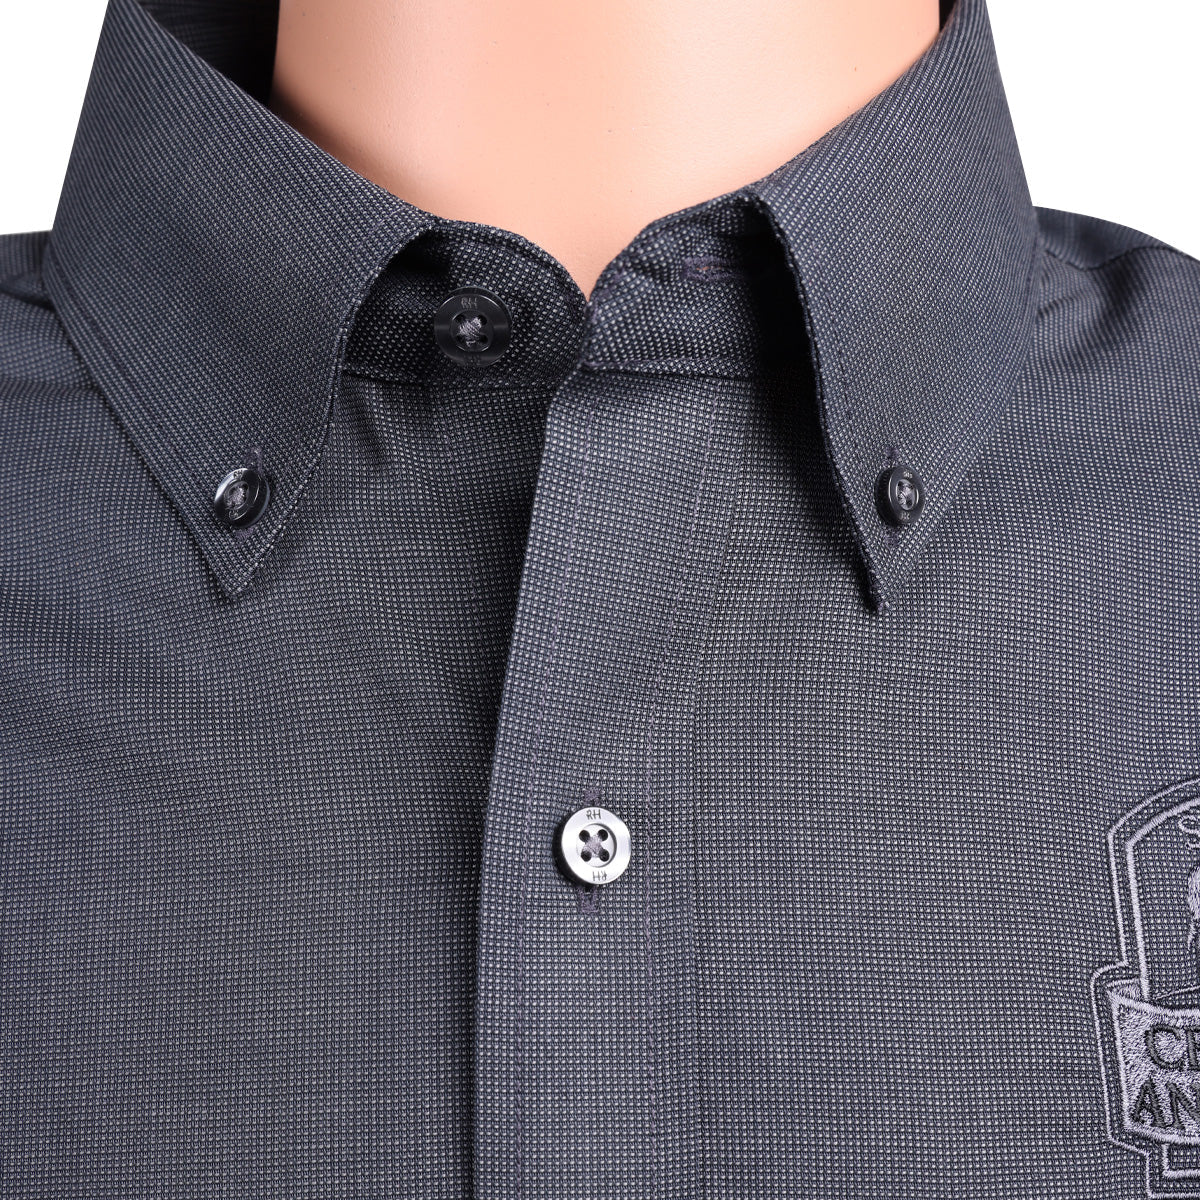 All-Business Button-Up